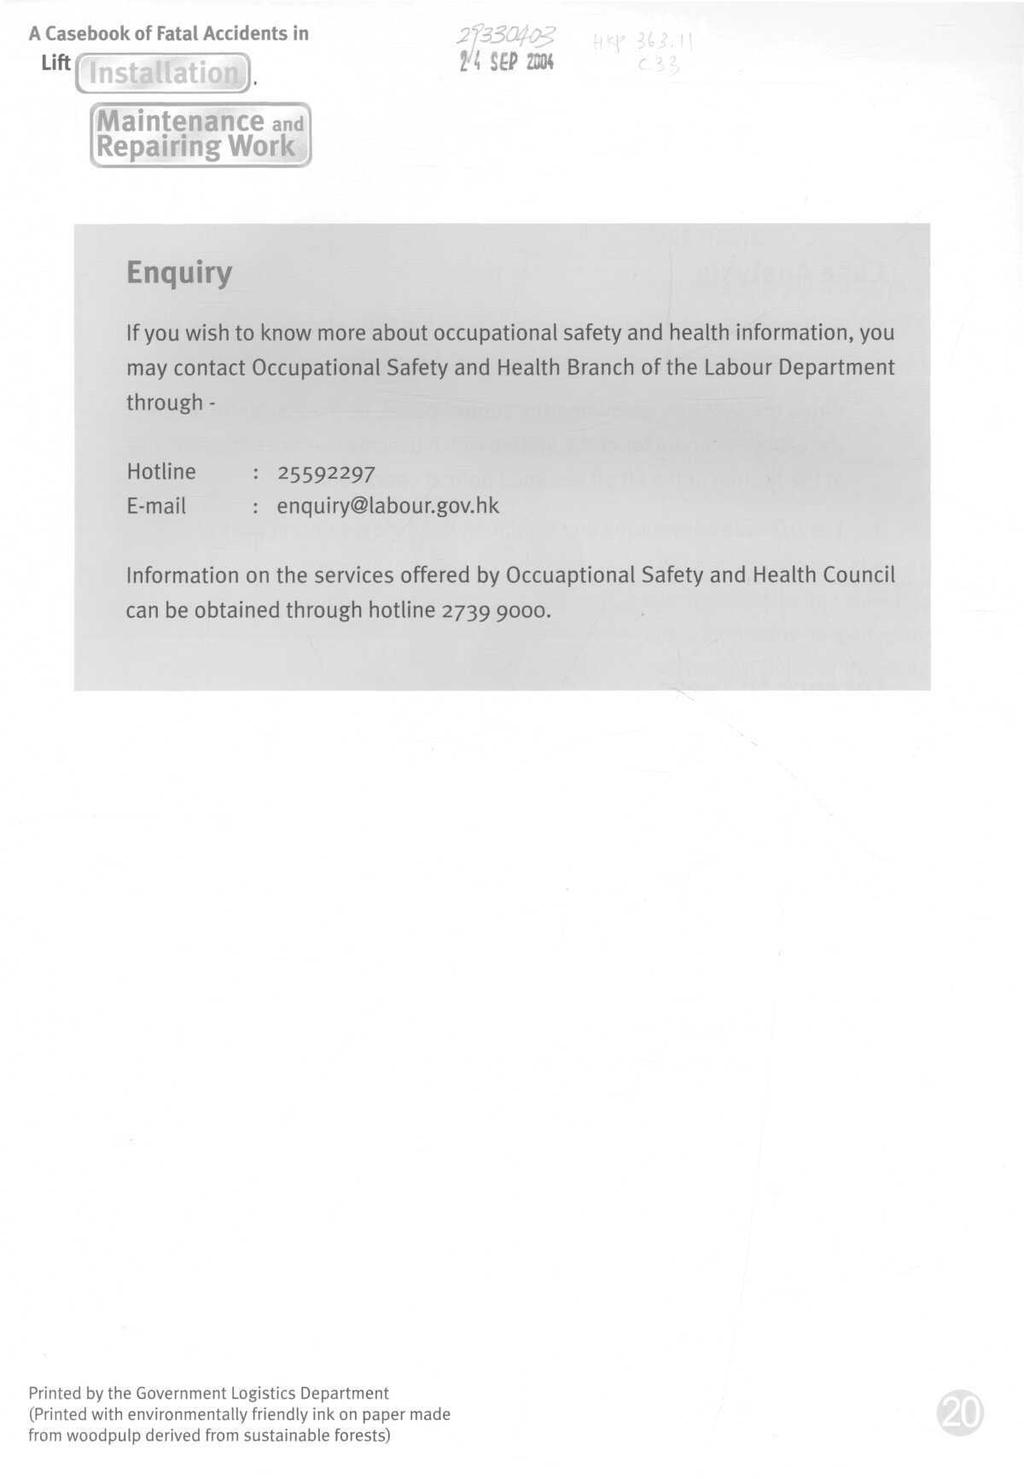 A Casebook of Fatal Accidents in Lift f 2^ SEP 2004 aintenance and] [Repairing Work] Enquiry If you wish to know more about occupational safety and health information, you may contact Occupational